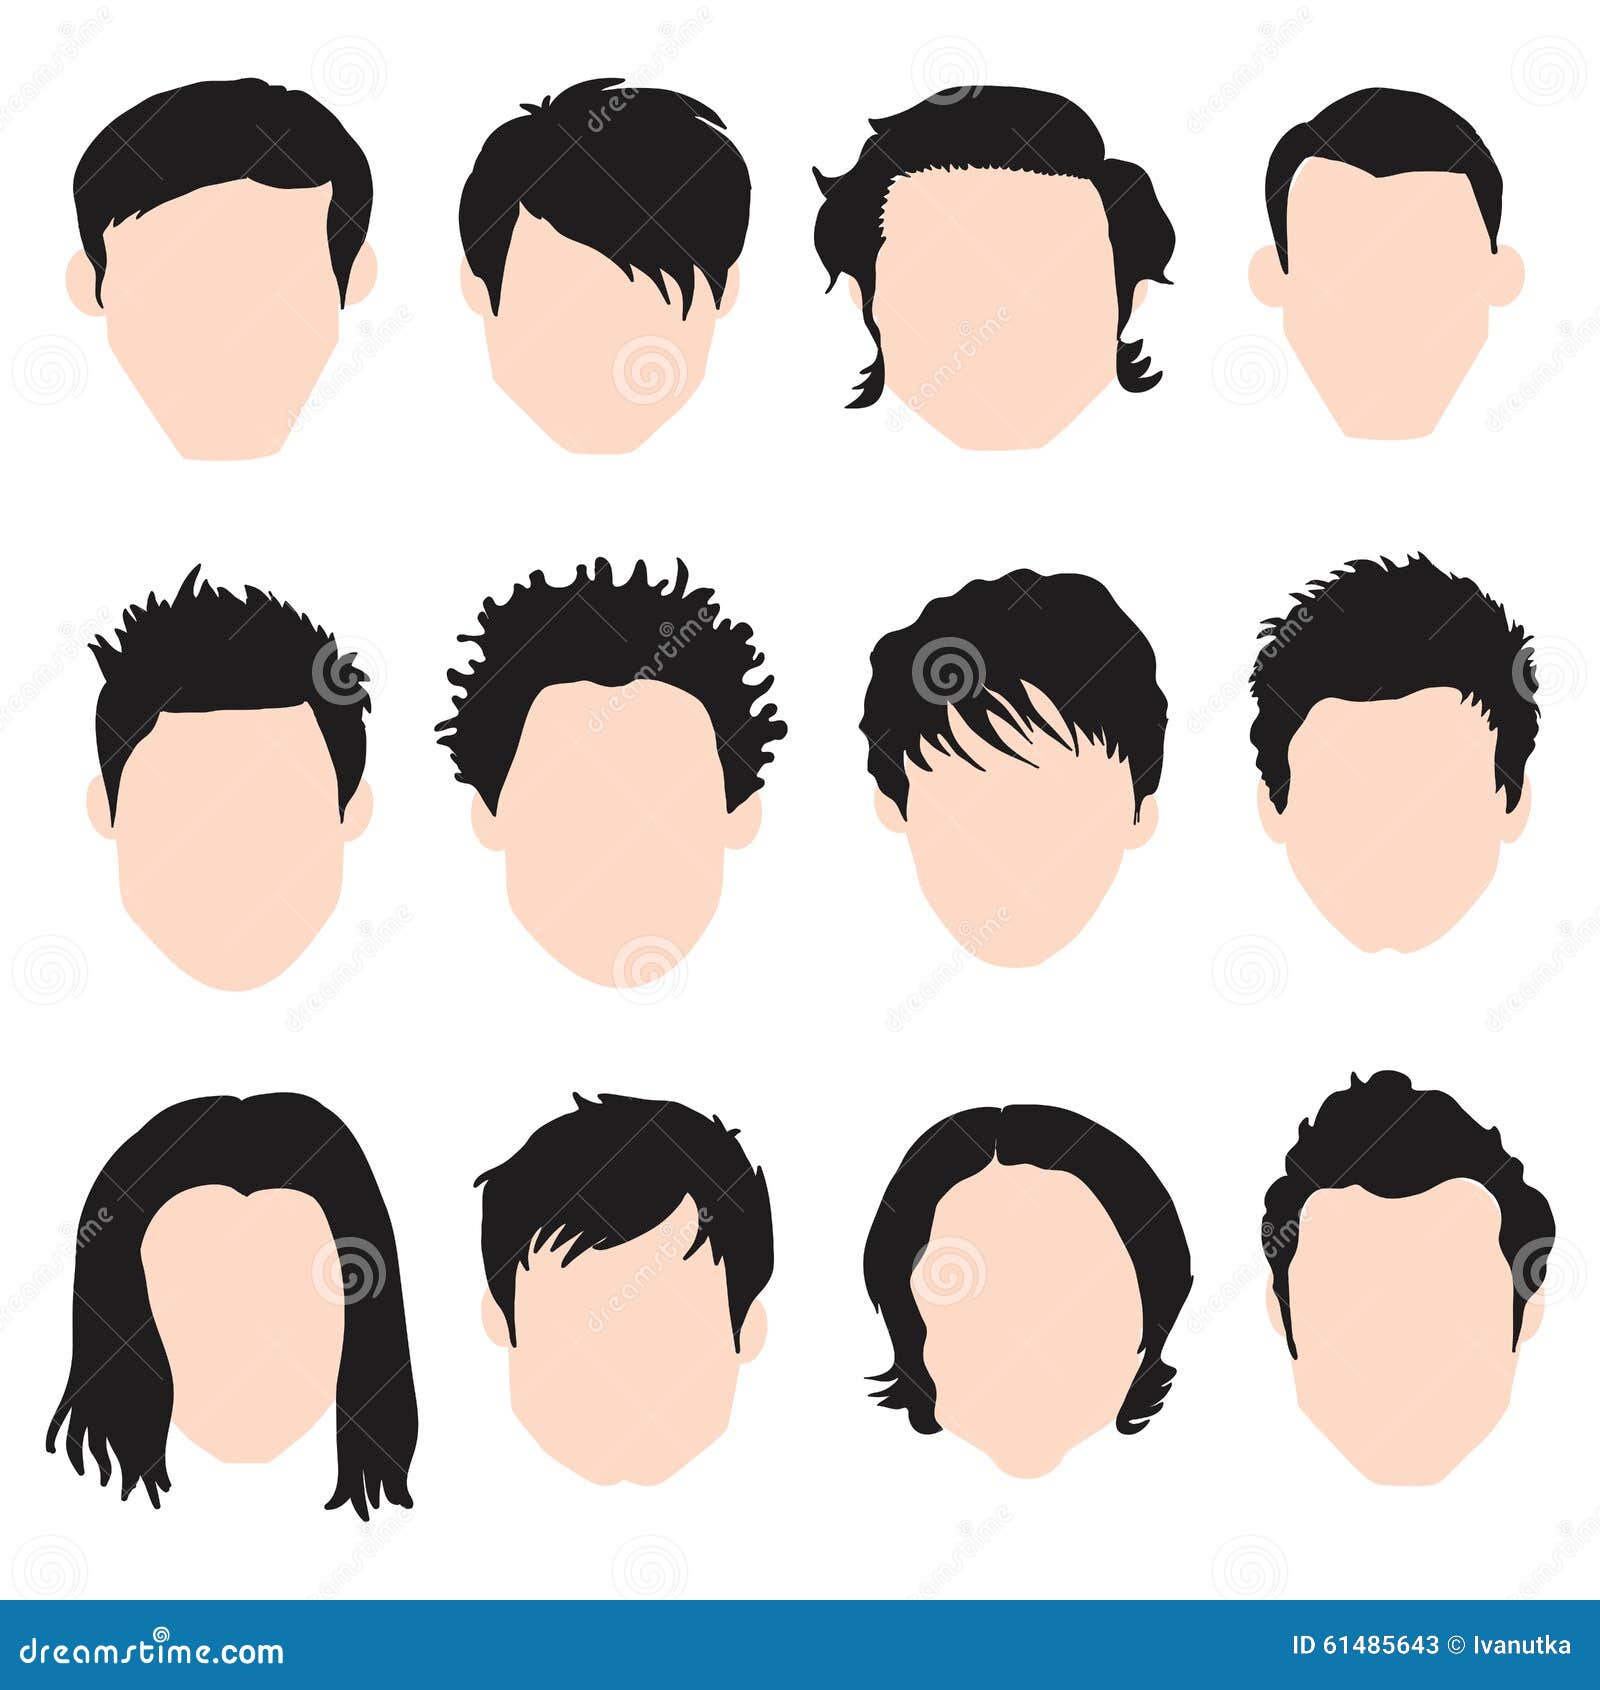 Hair style set for men stock vector. Illustration of hairstyle - 61485643